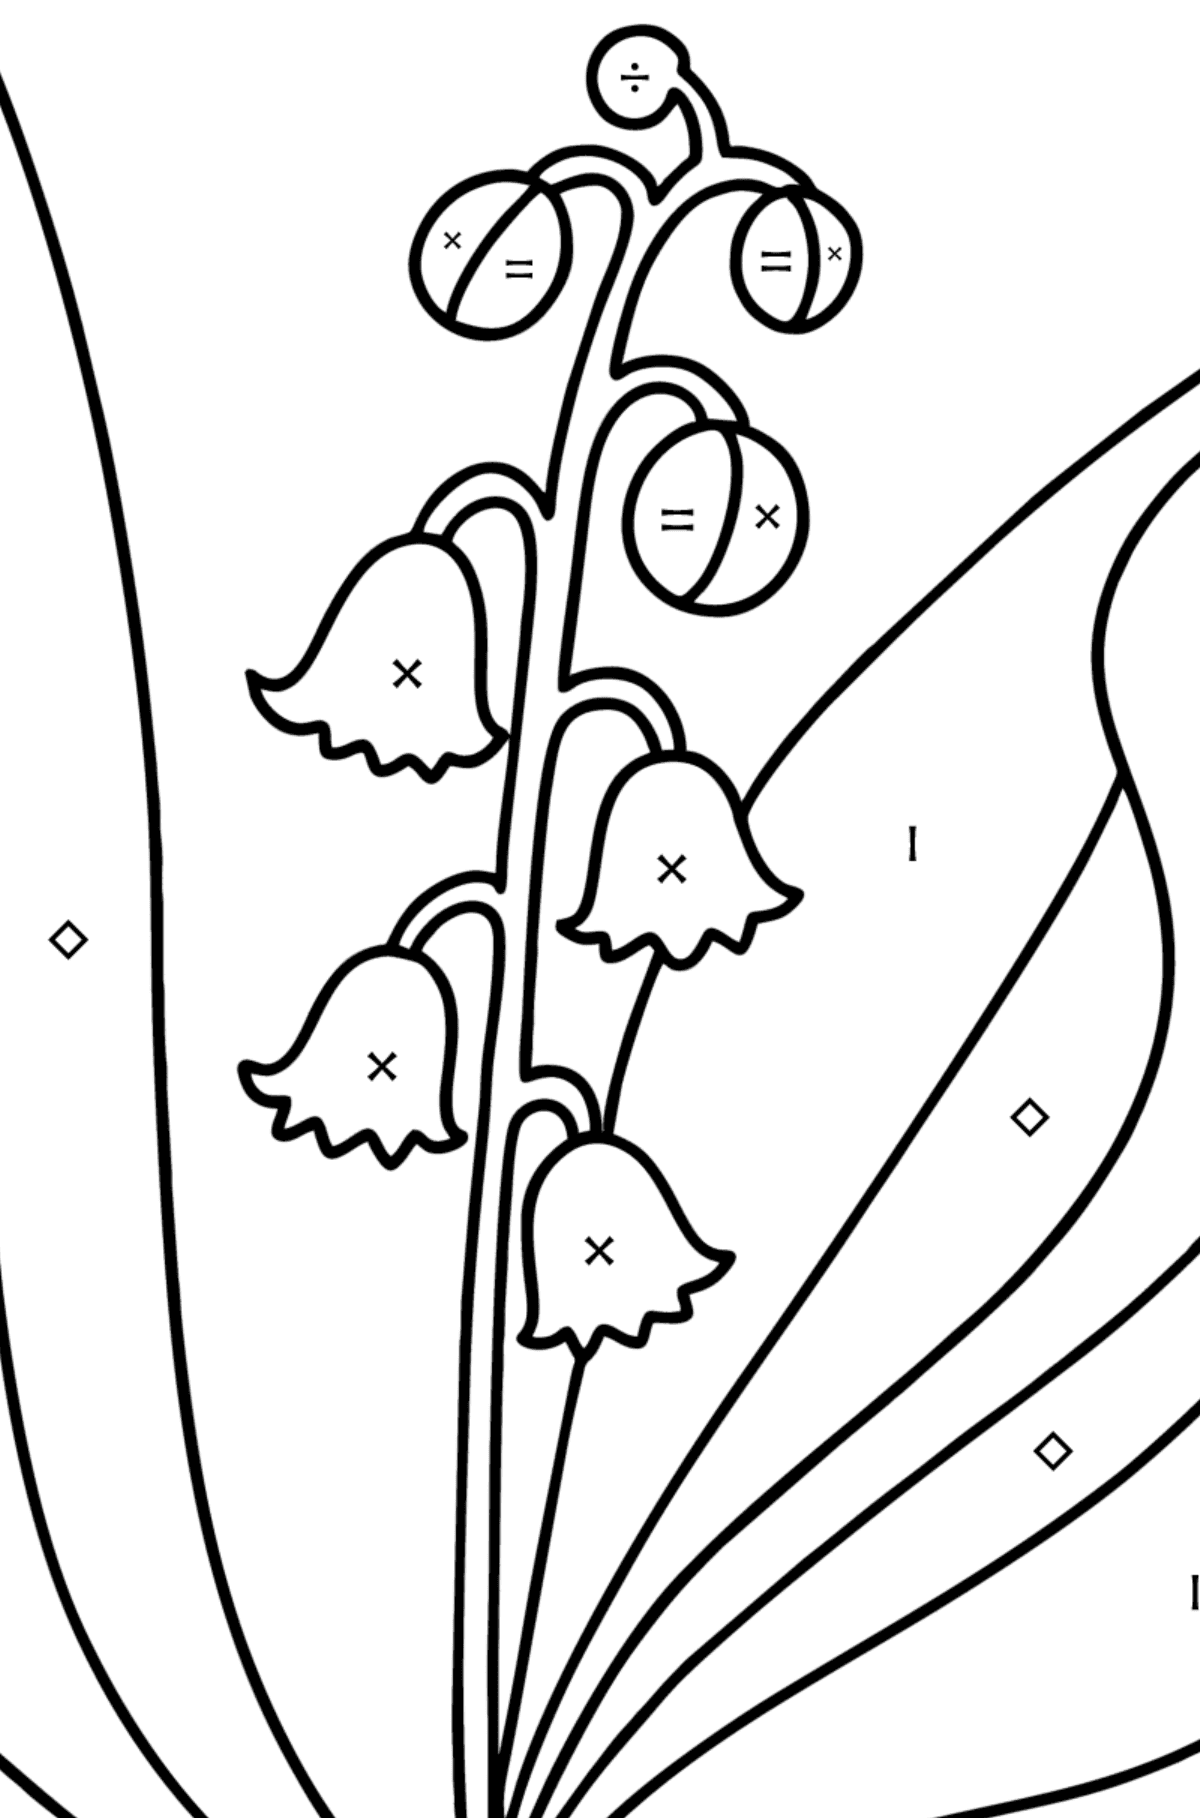 Lily of valley coloring page - Coloring by Symbols for Kids